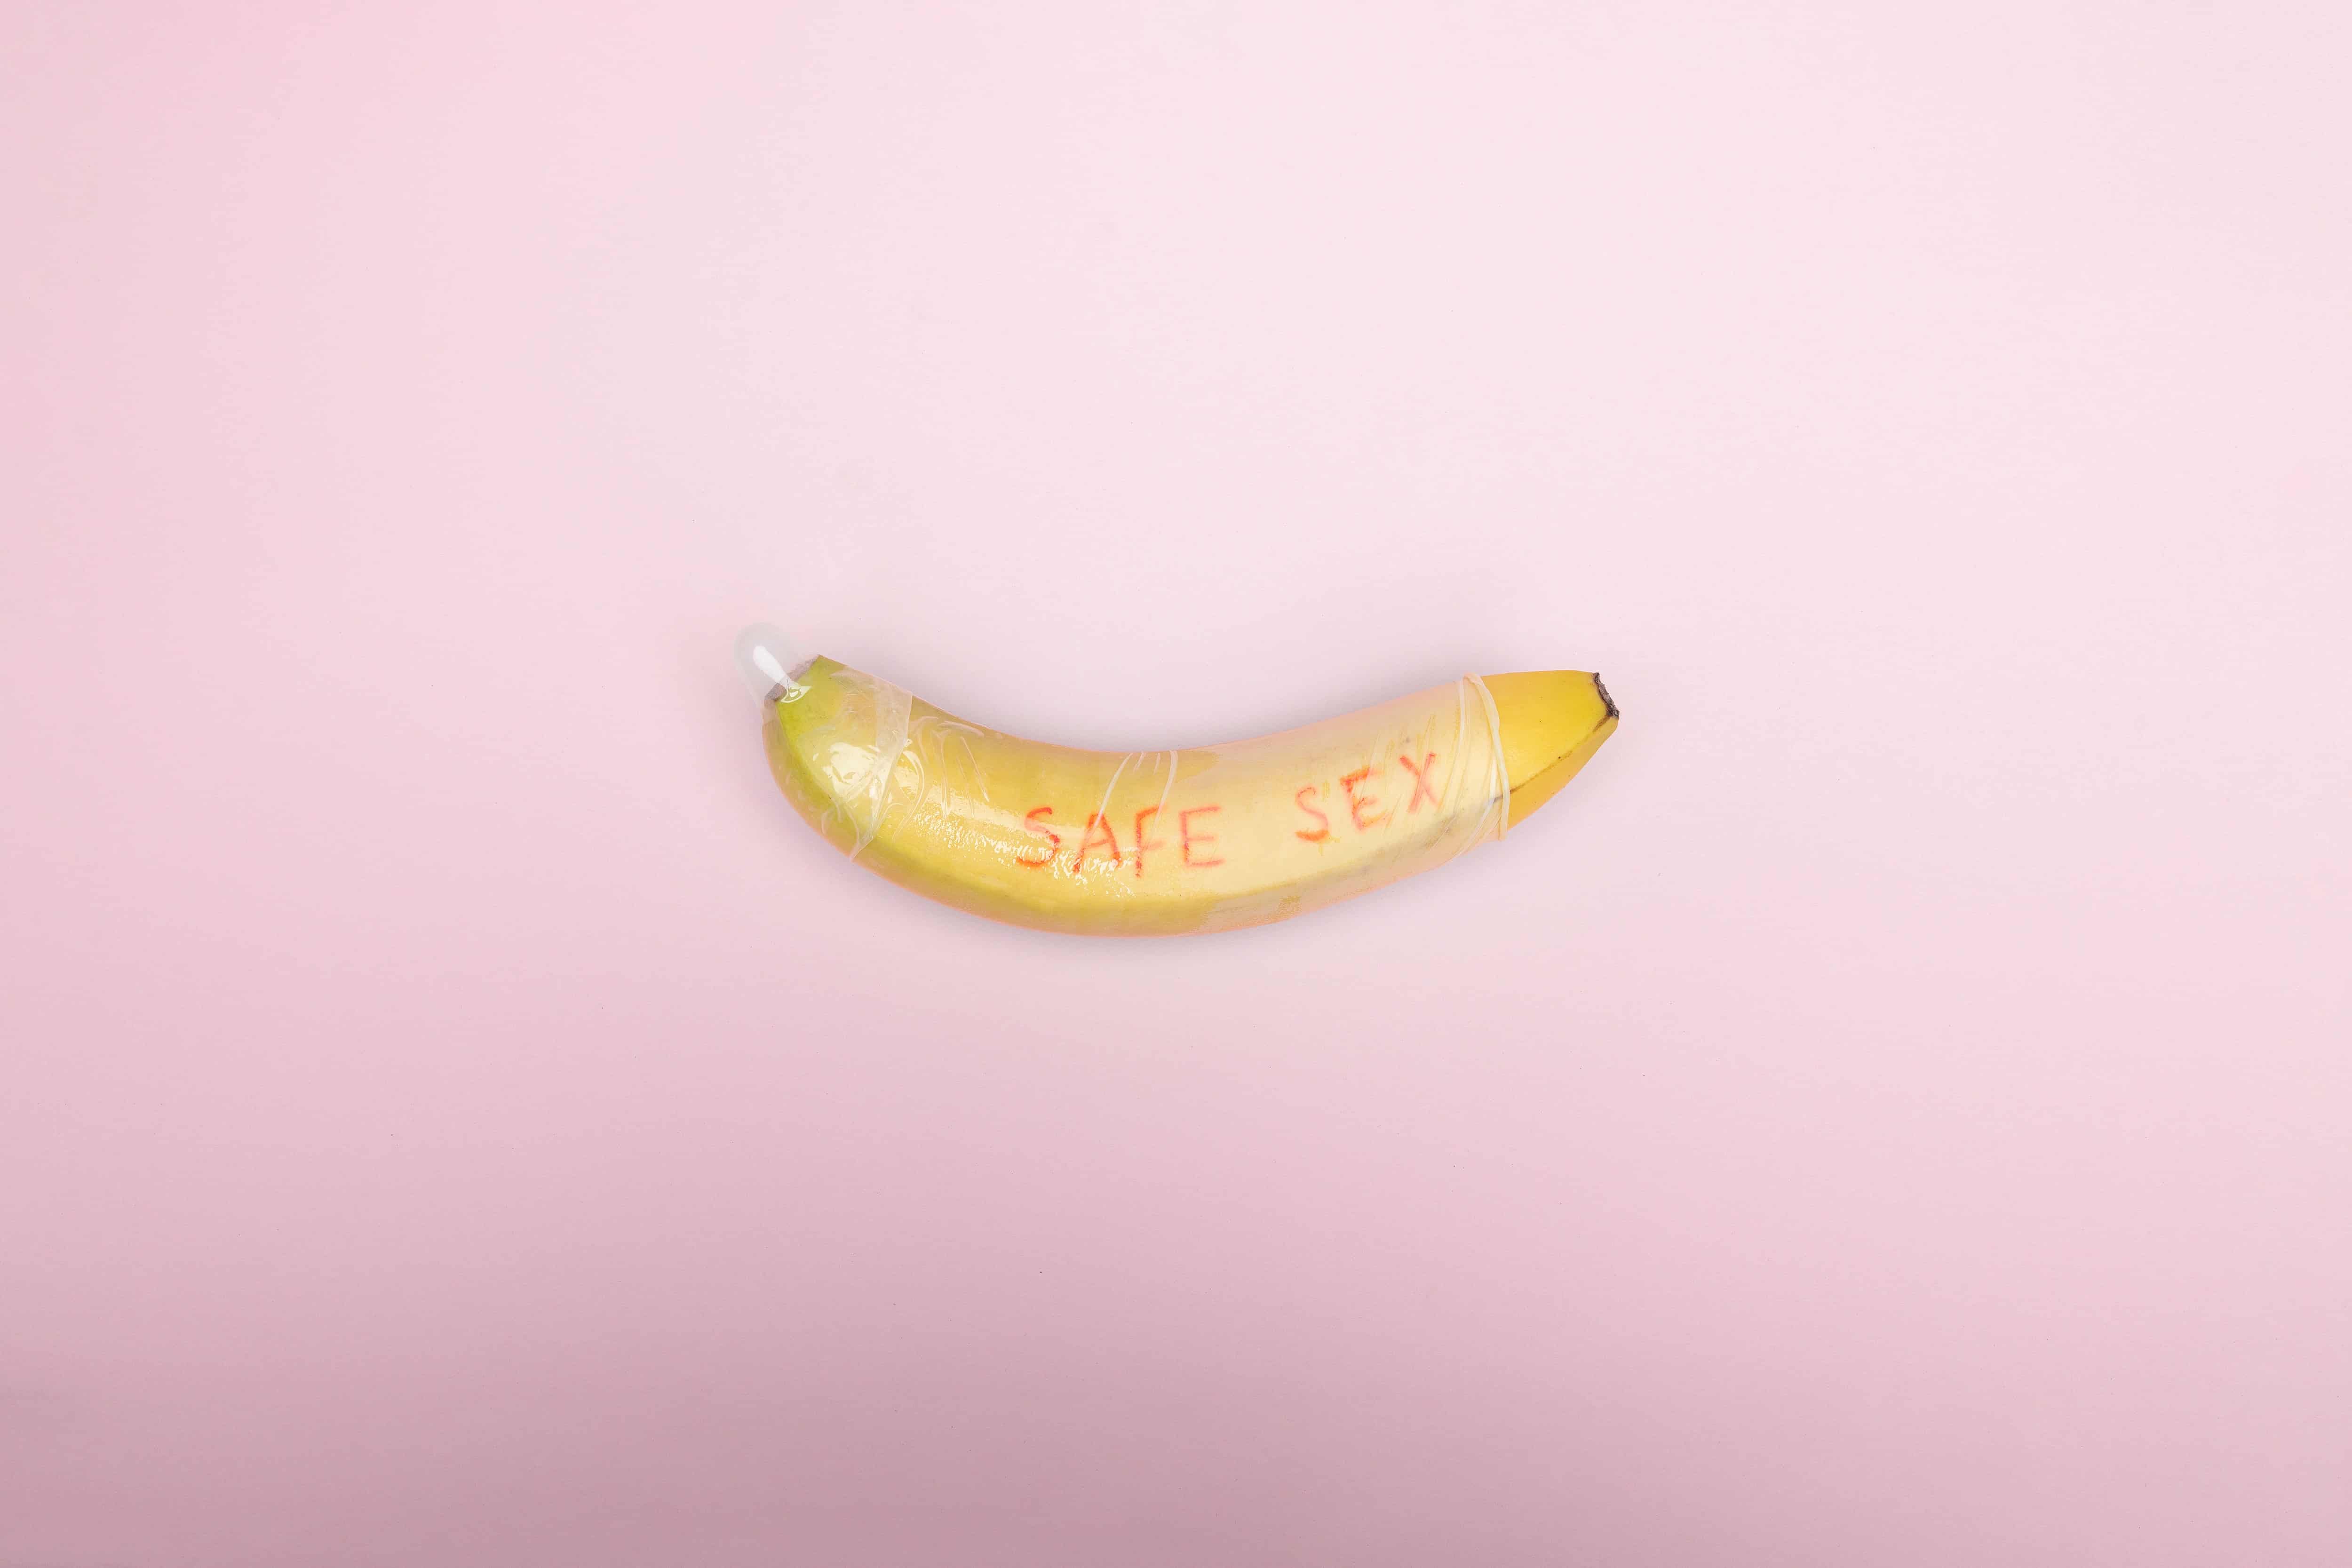 Picture of a banana in a condom on a pink background